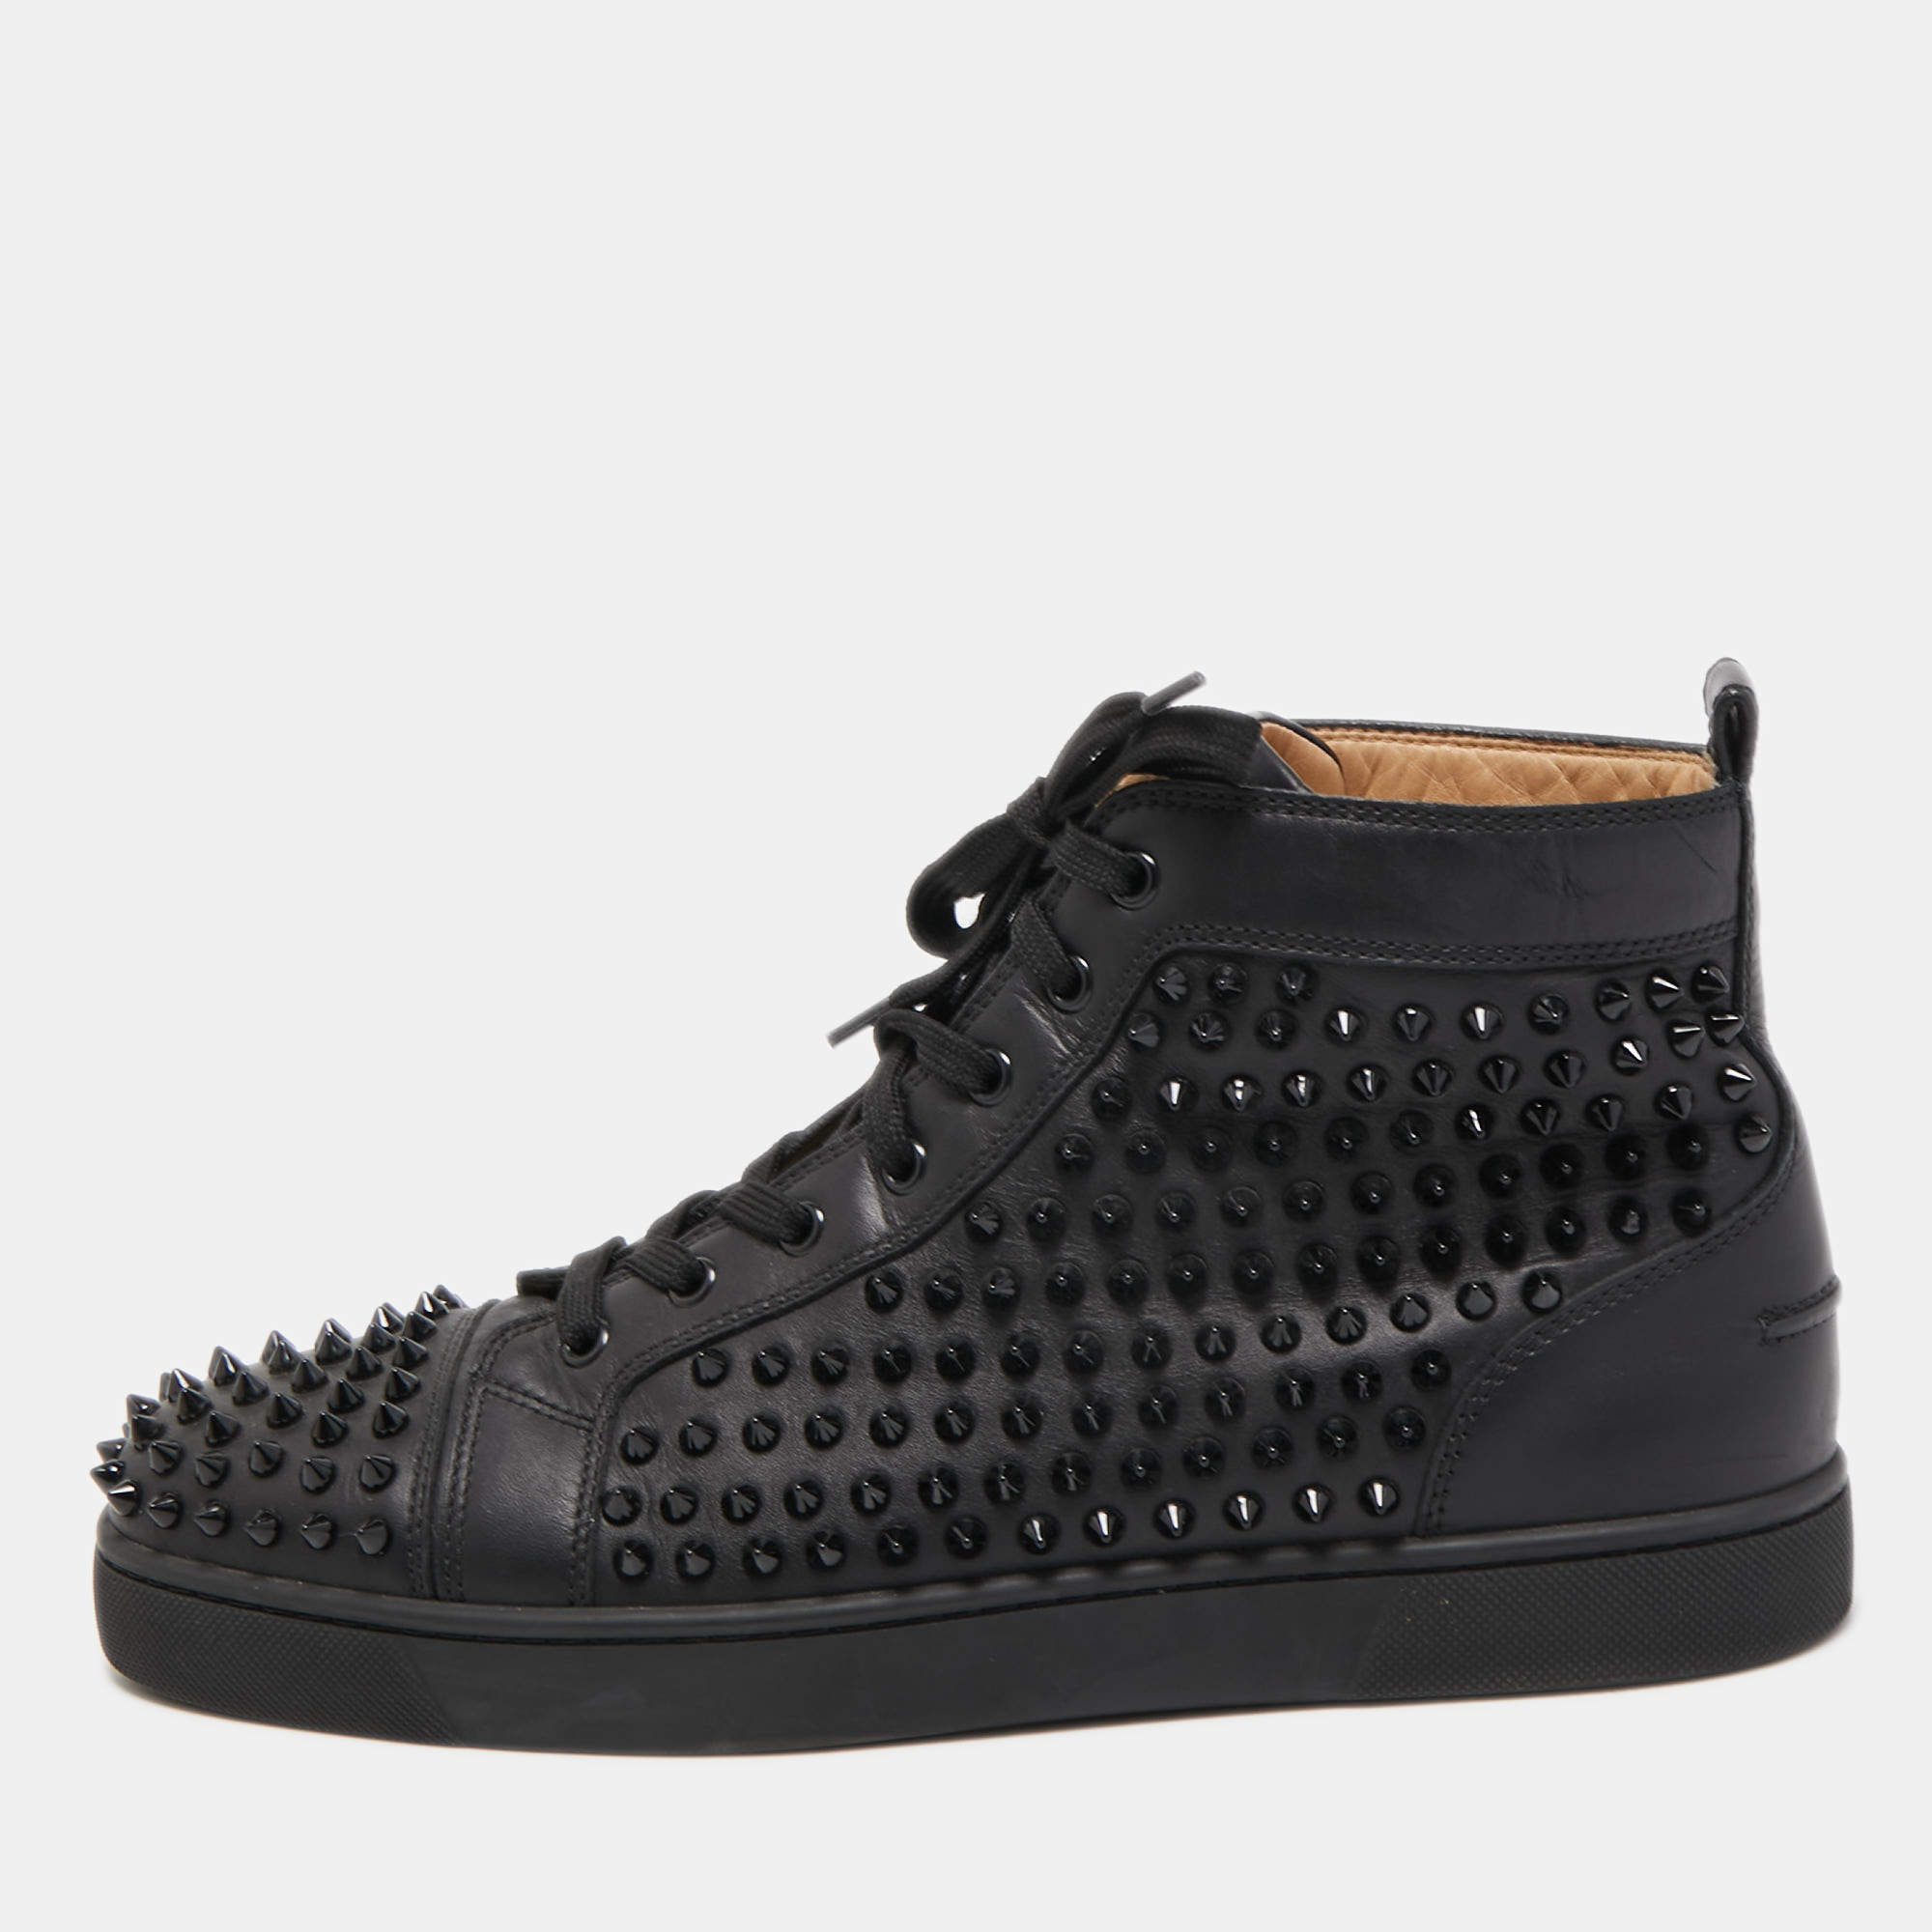 Christian Louboutin Black Leather Louis Spike Sneakers Size 43.5